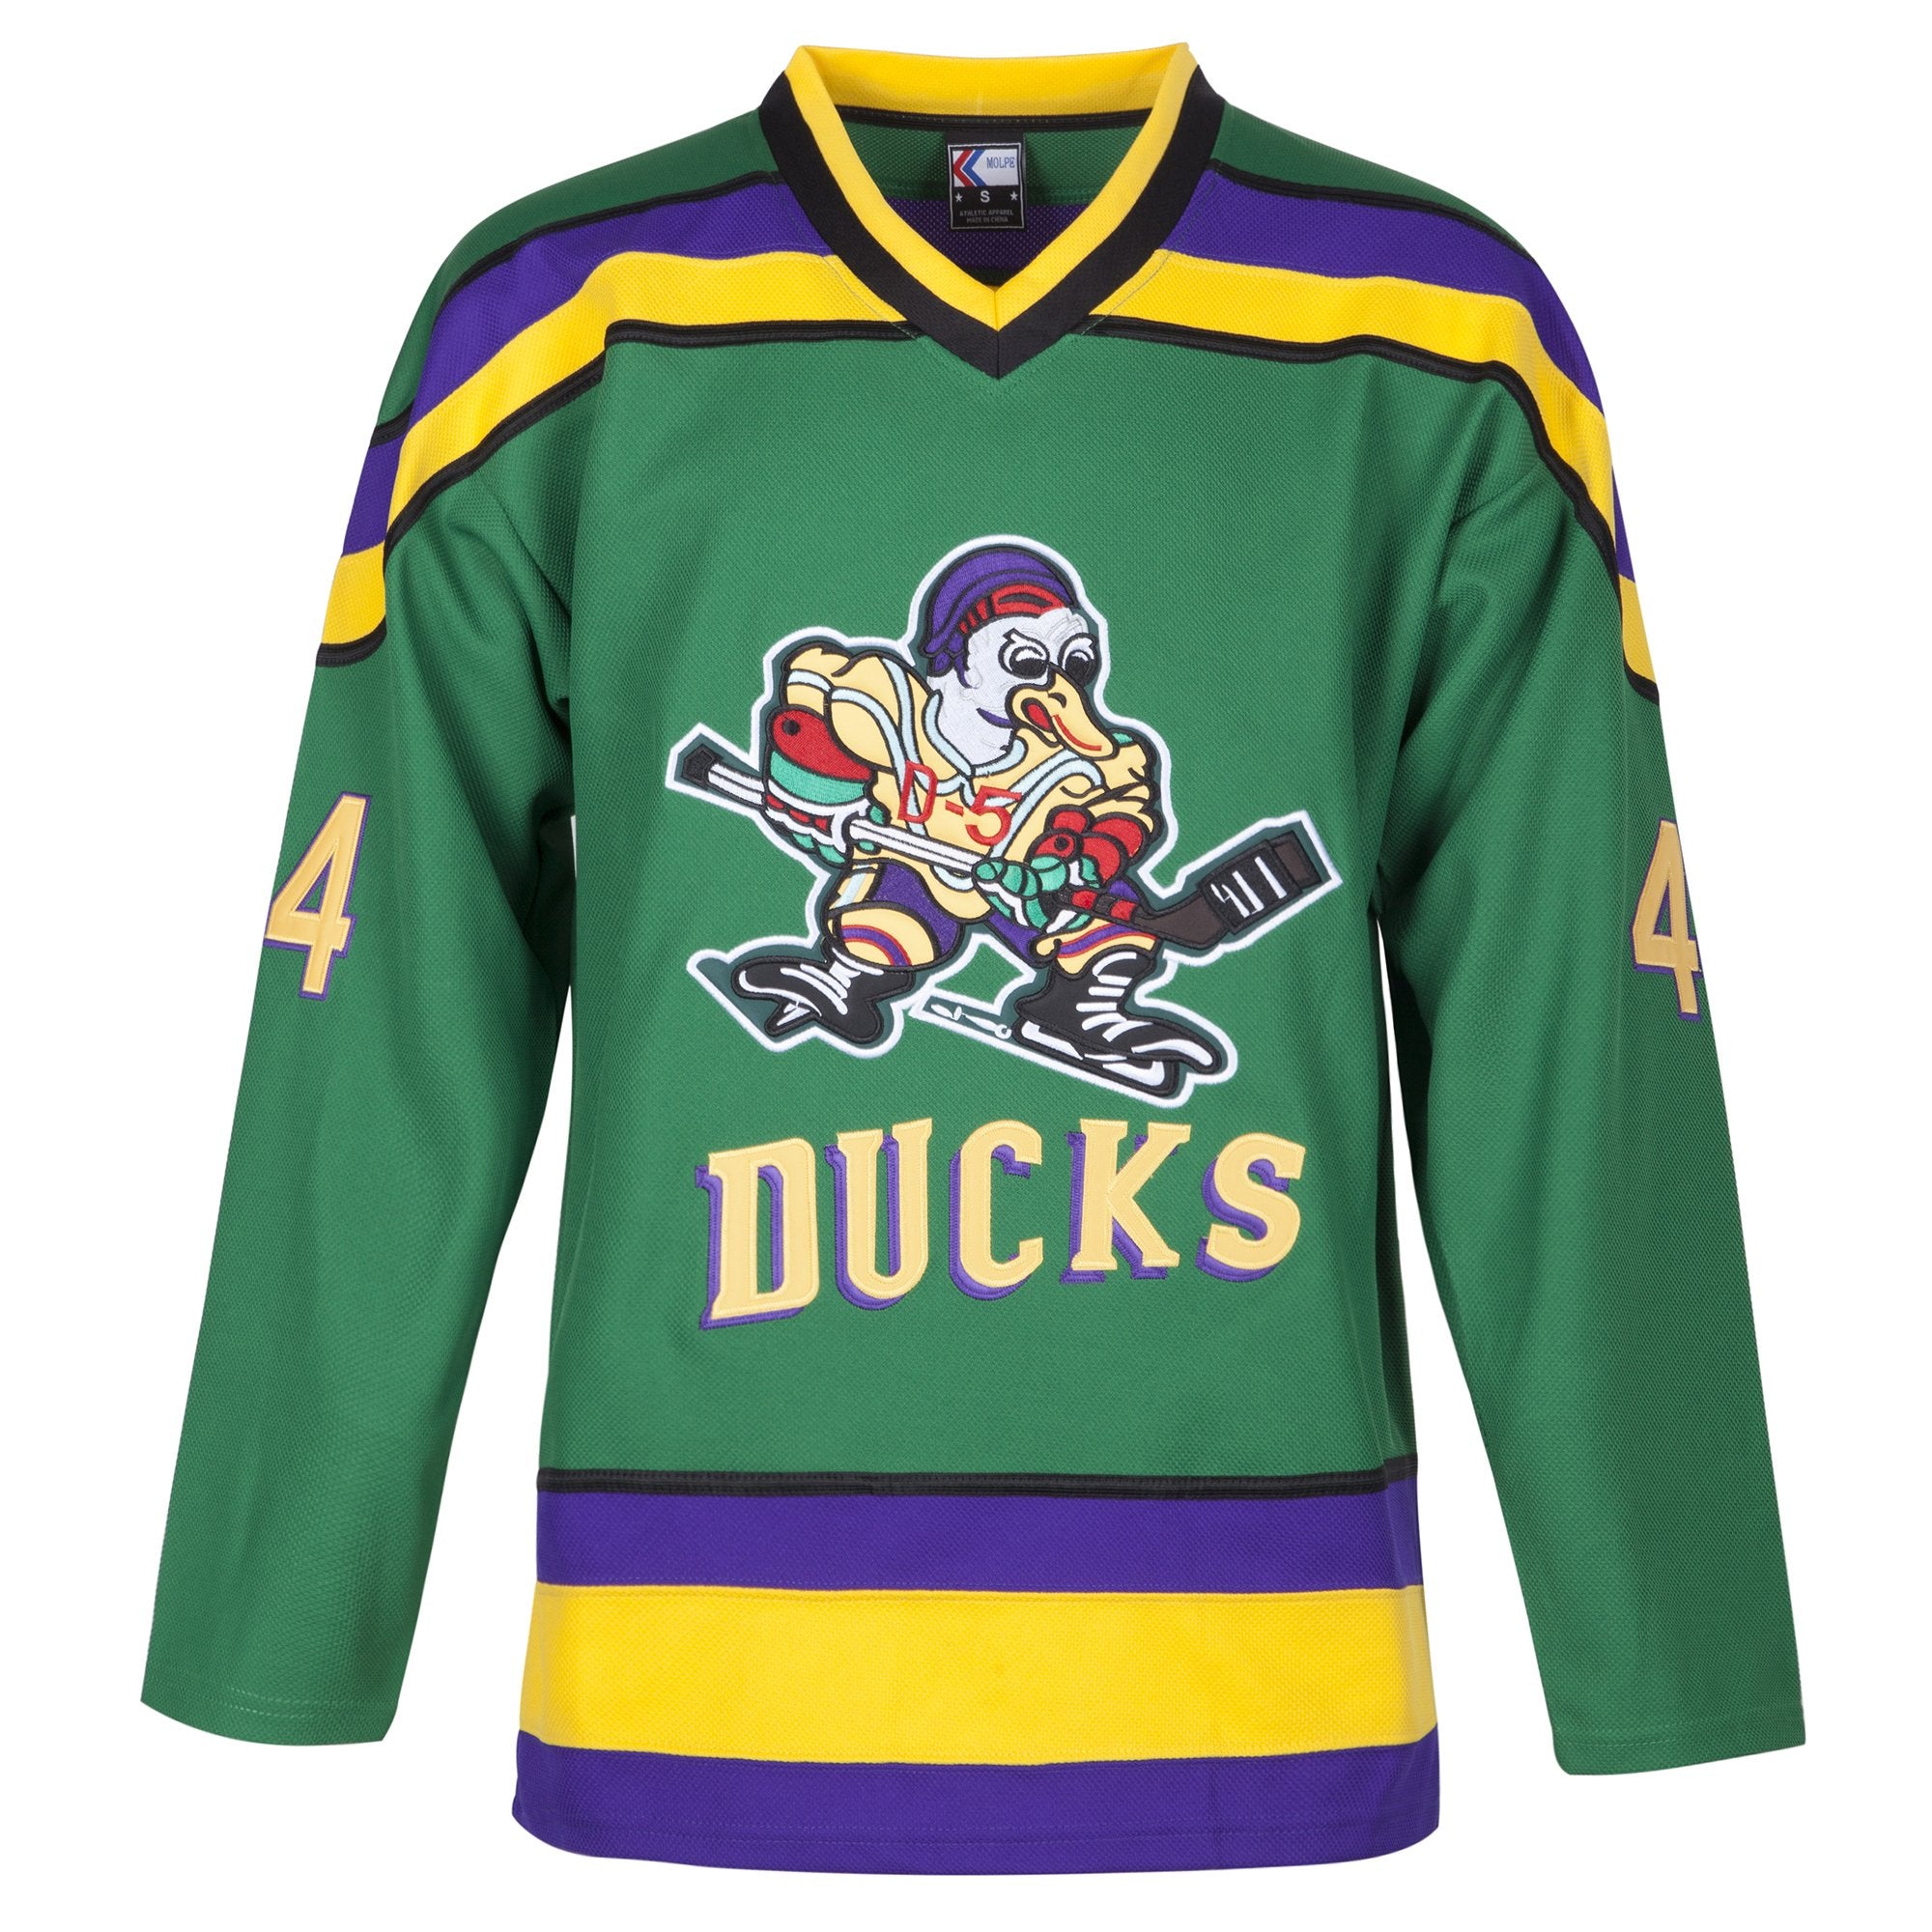 Buy Cheap Movie and TV Show Hockey Jersey online